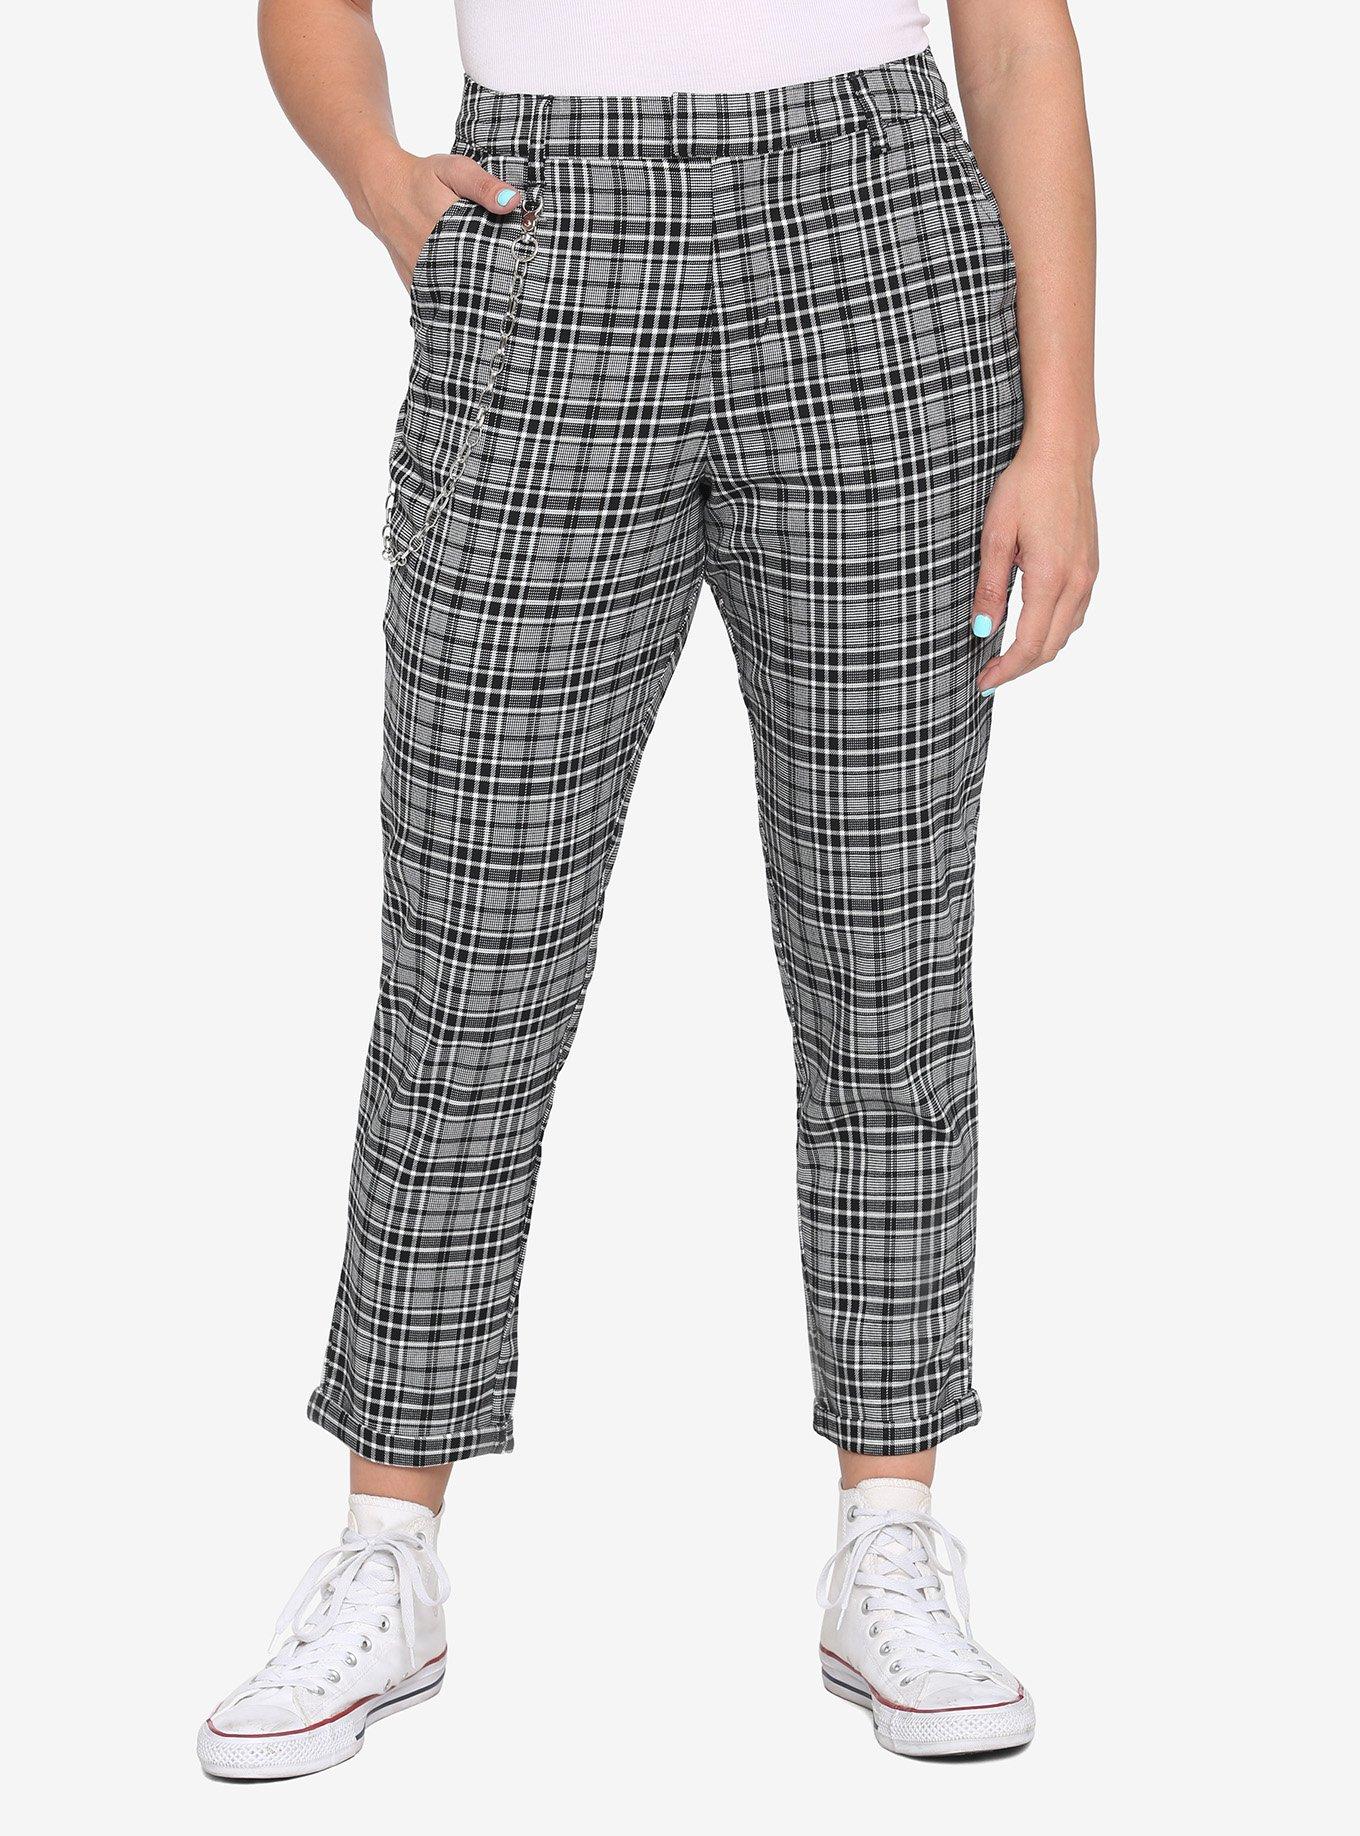 Grey Plaid Pants With Detachable Chain | Hot Topic